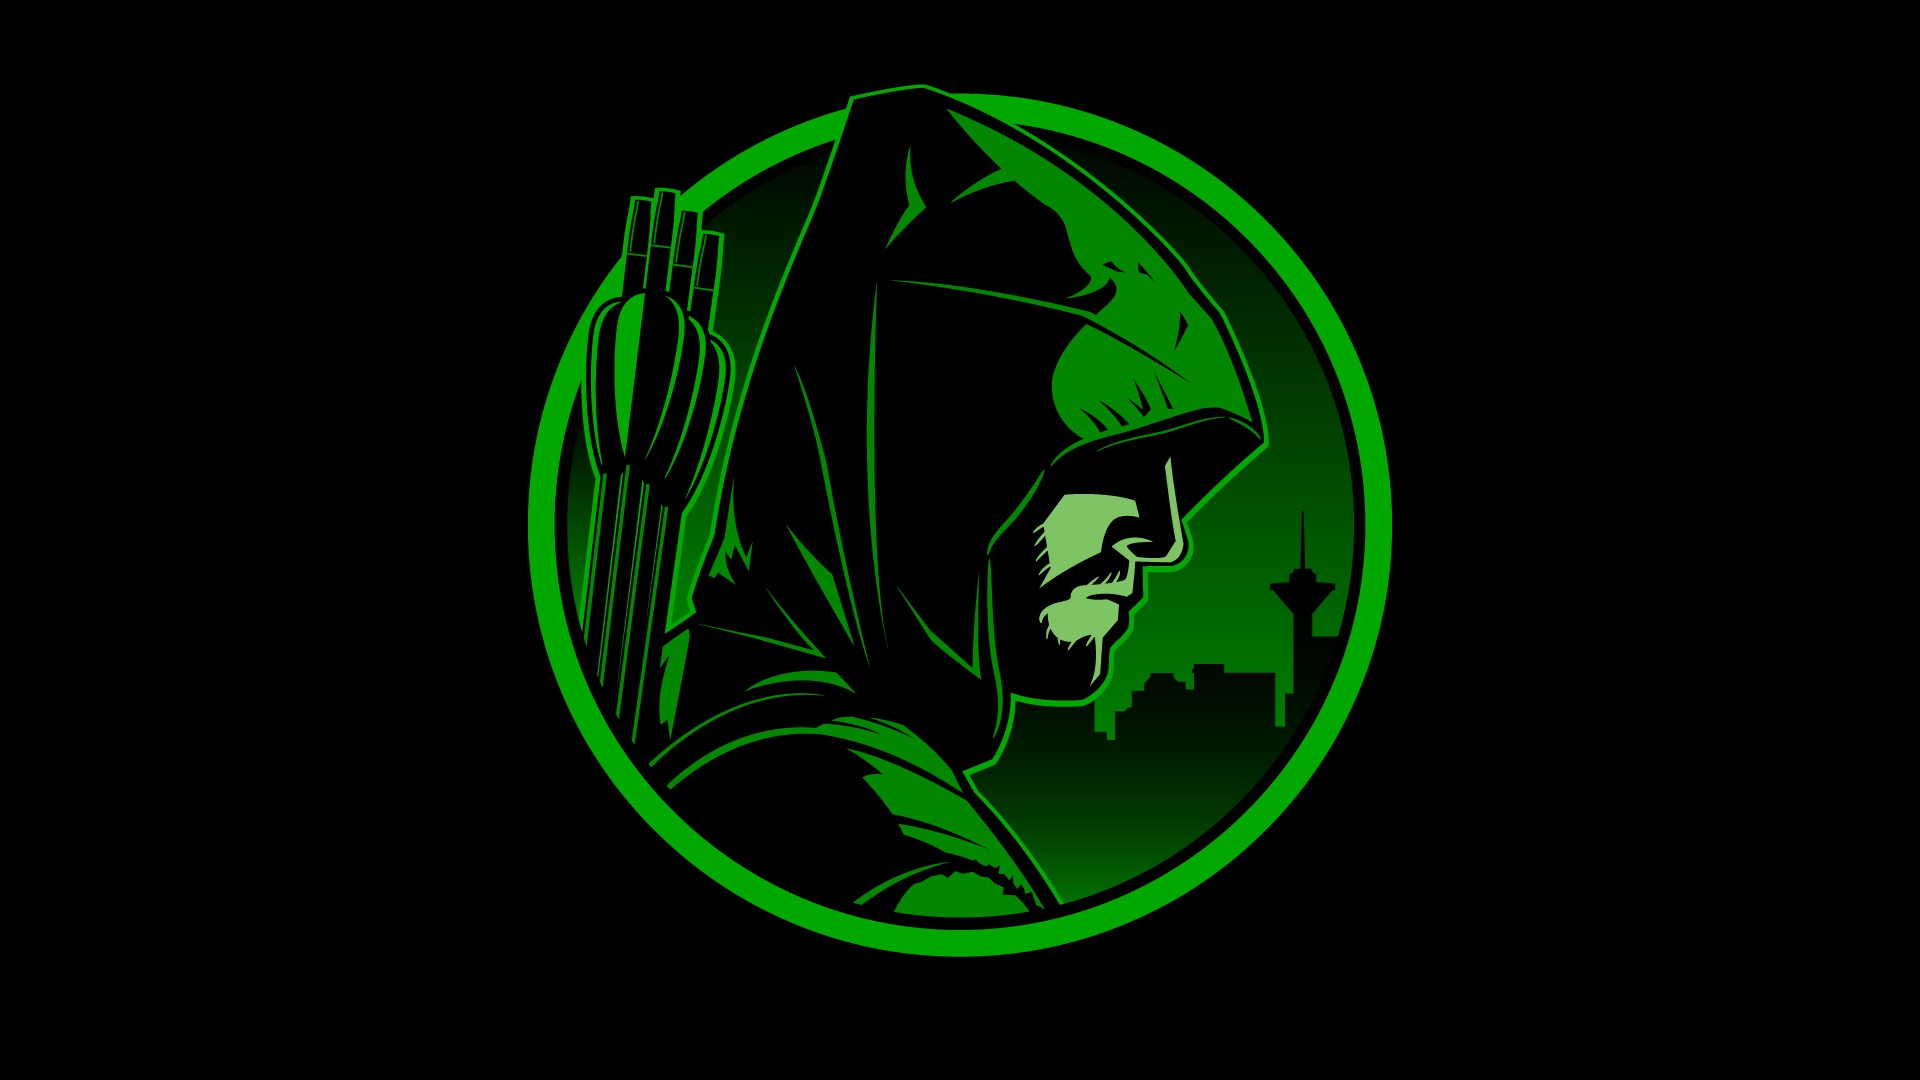 Arrow In The Style Of Dick Tracy Movie Logo Wallpaper